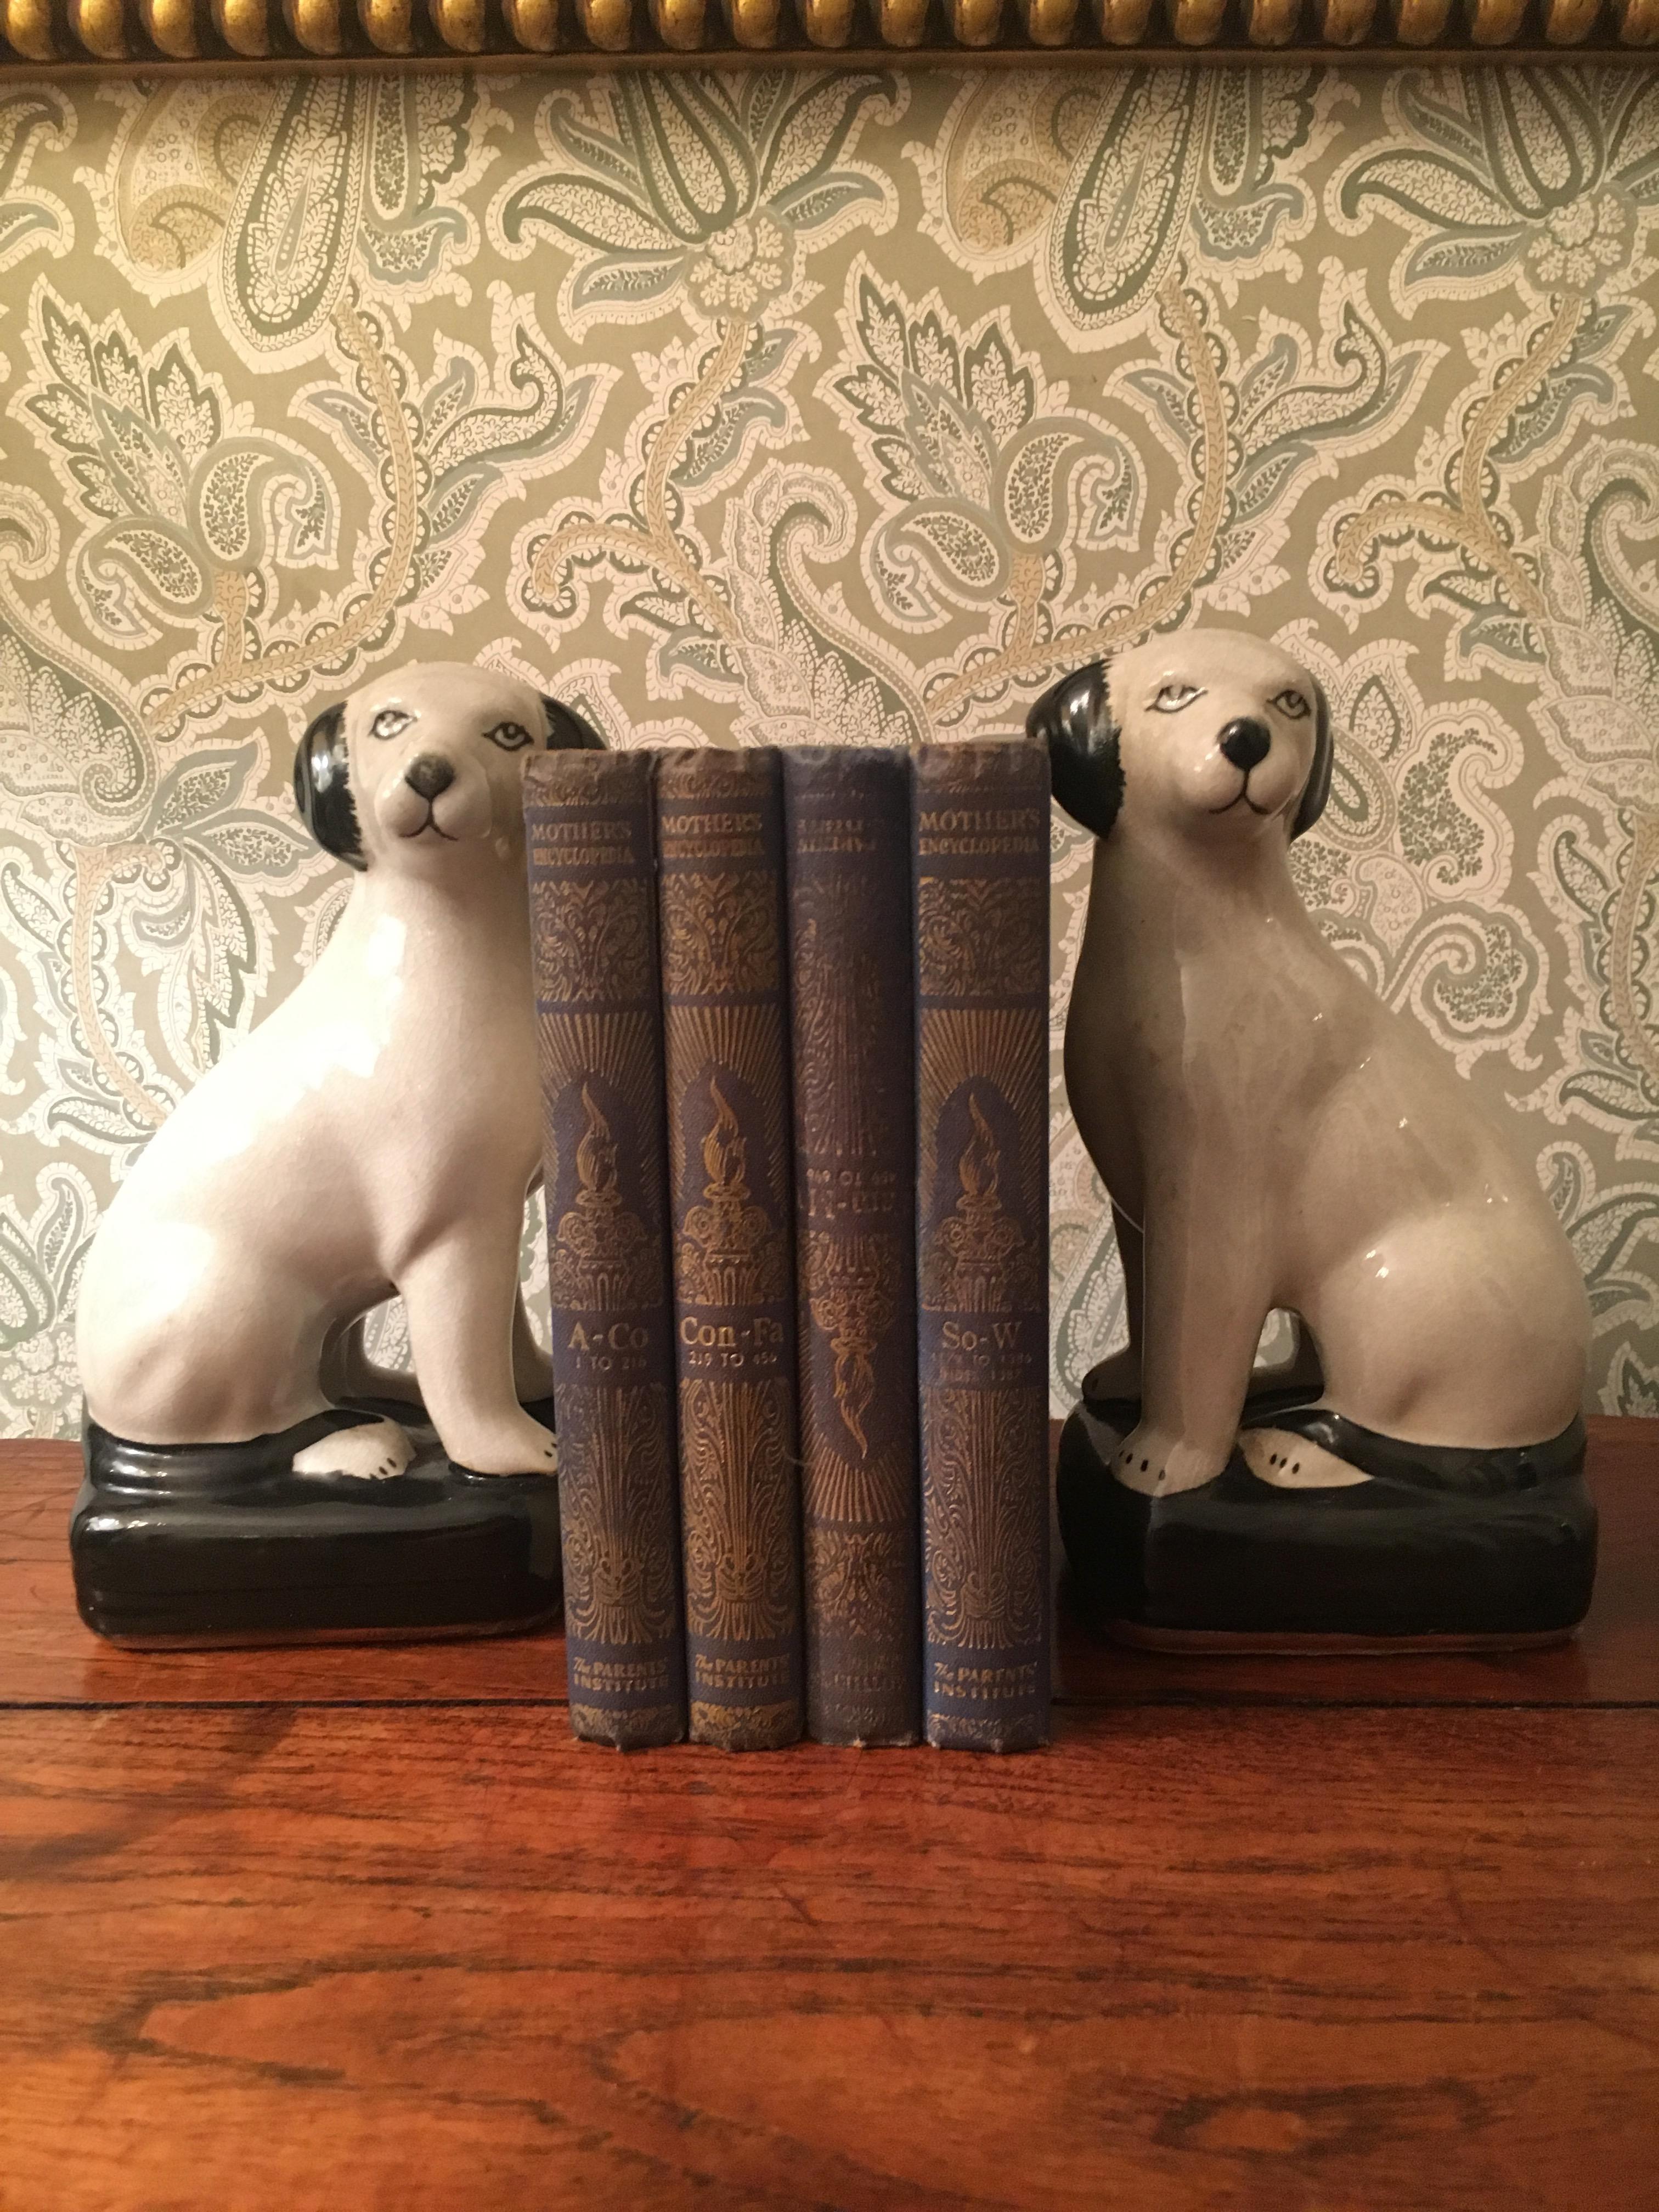 Pair of dog bookends in the manner of Staffordshire - a nice pair ready to hold books from the childs room to the sophisticated office or den.